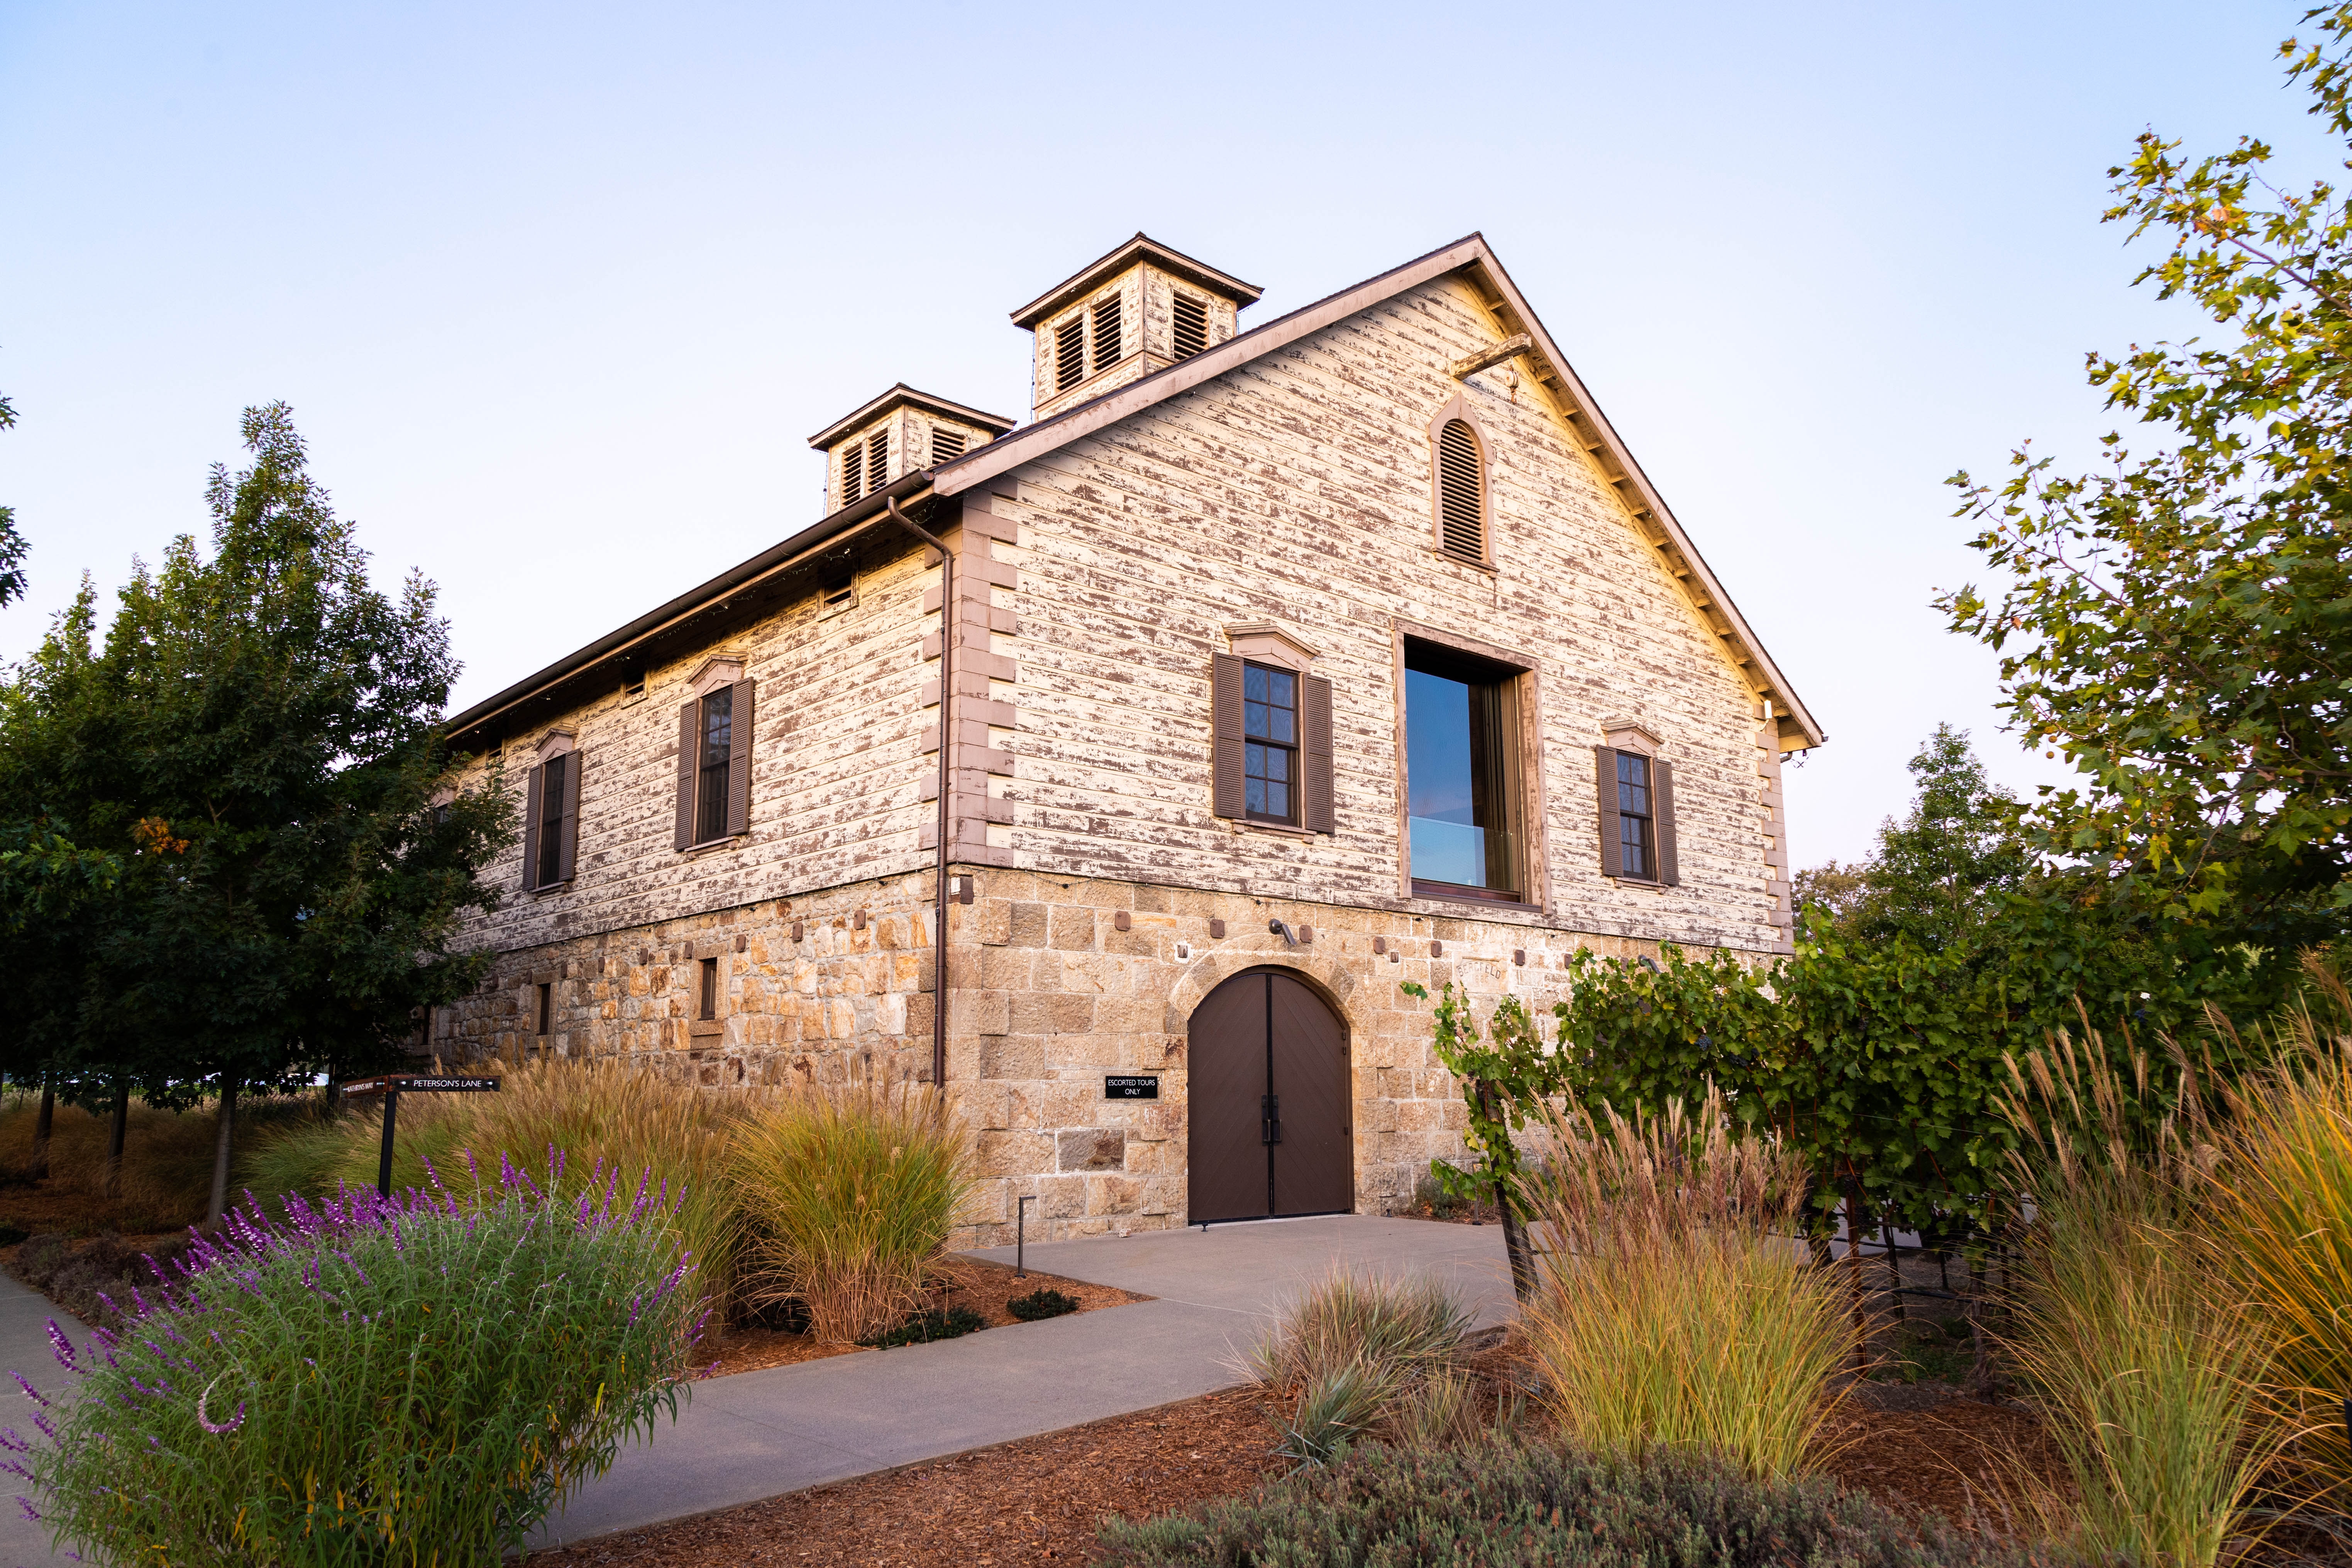 The Historic Bergfeld Building located at HALL Wines